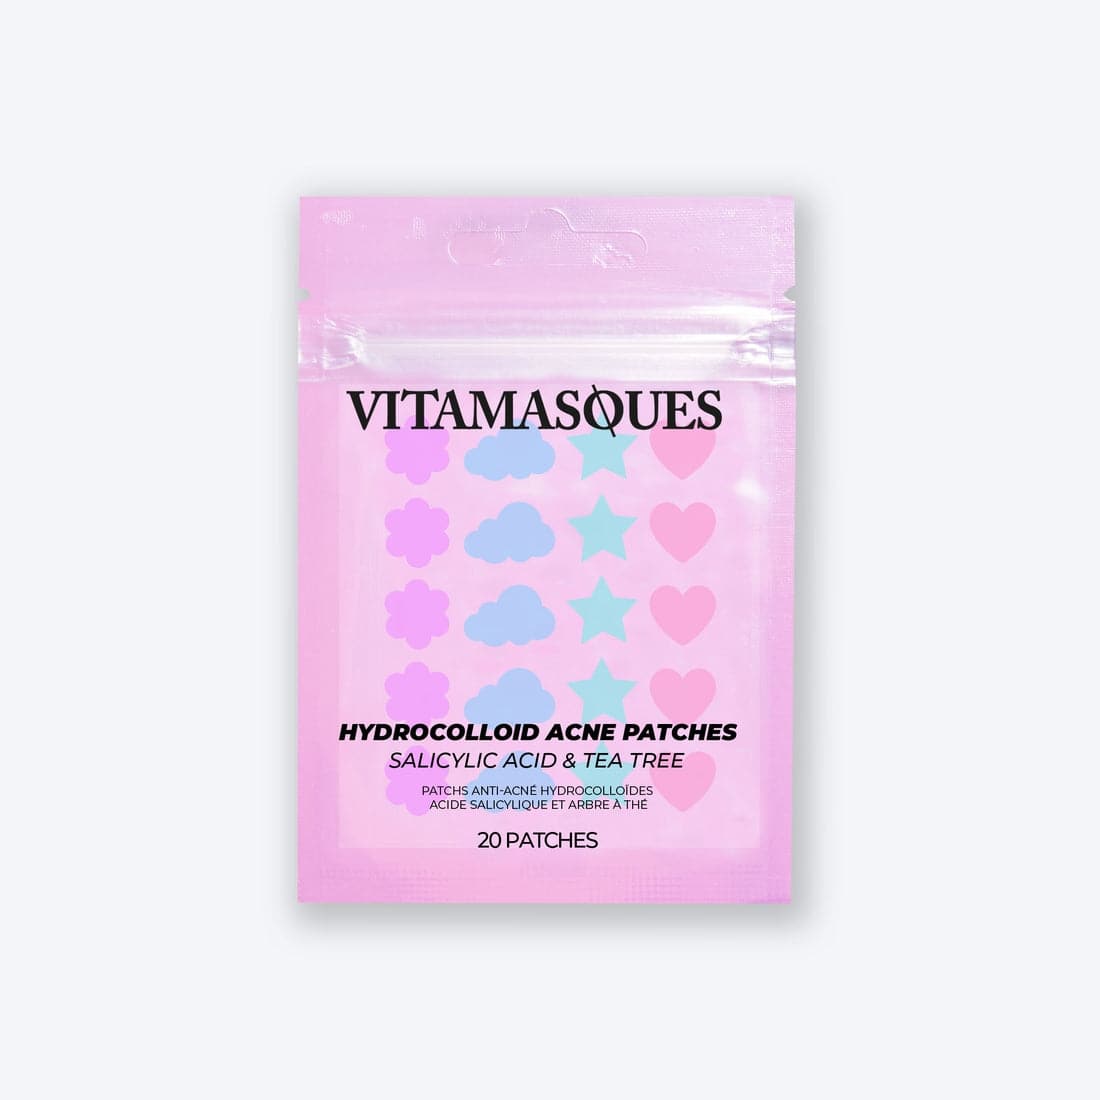 Hydrocolloid acne patches in the shape of hearts, stars, clouds and flowers.